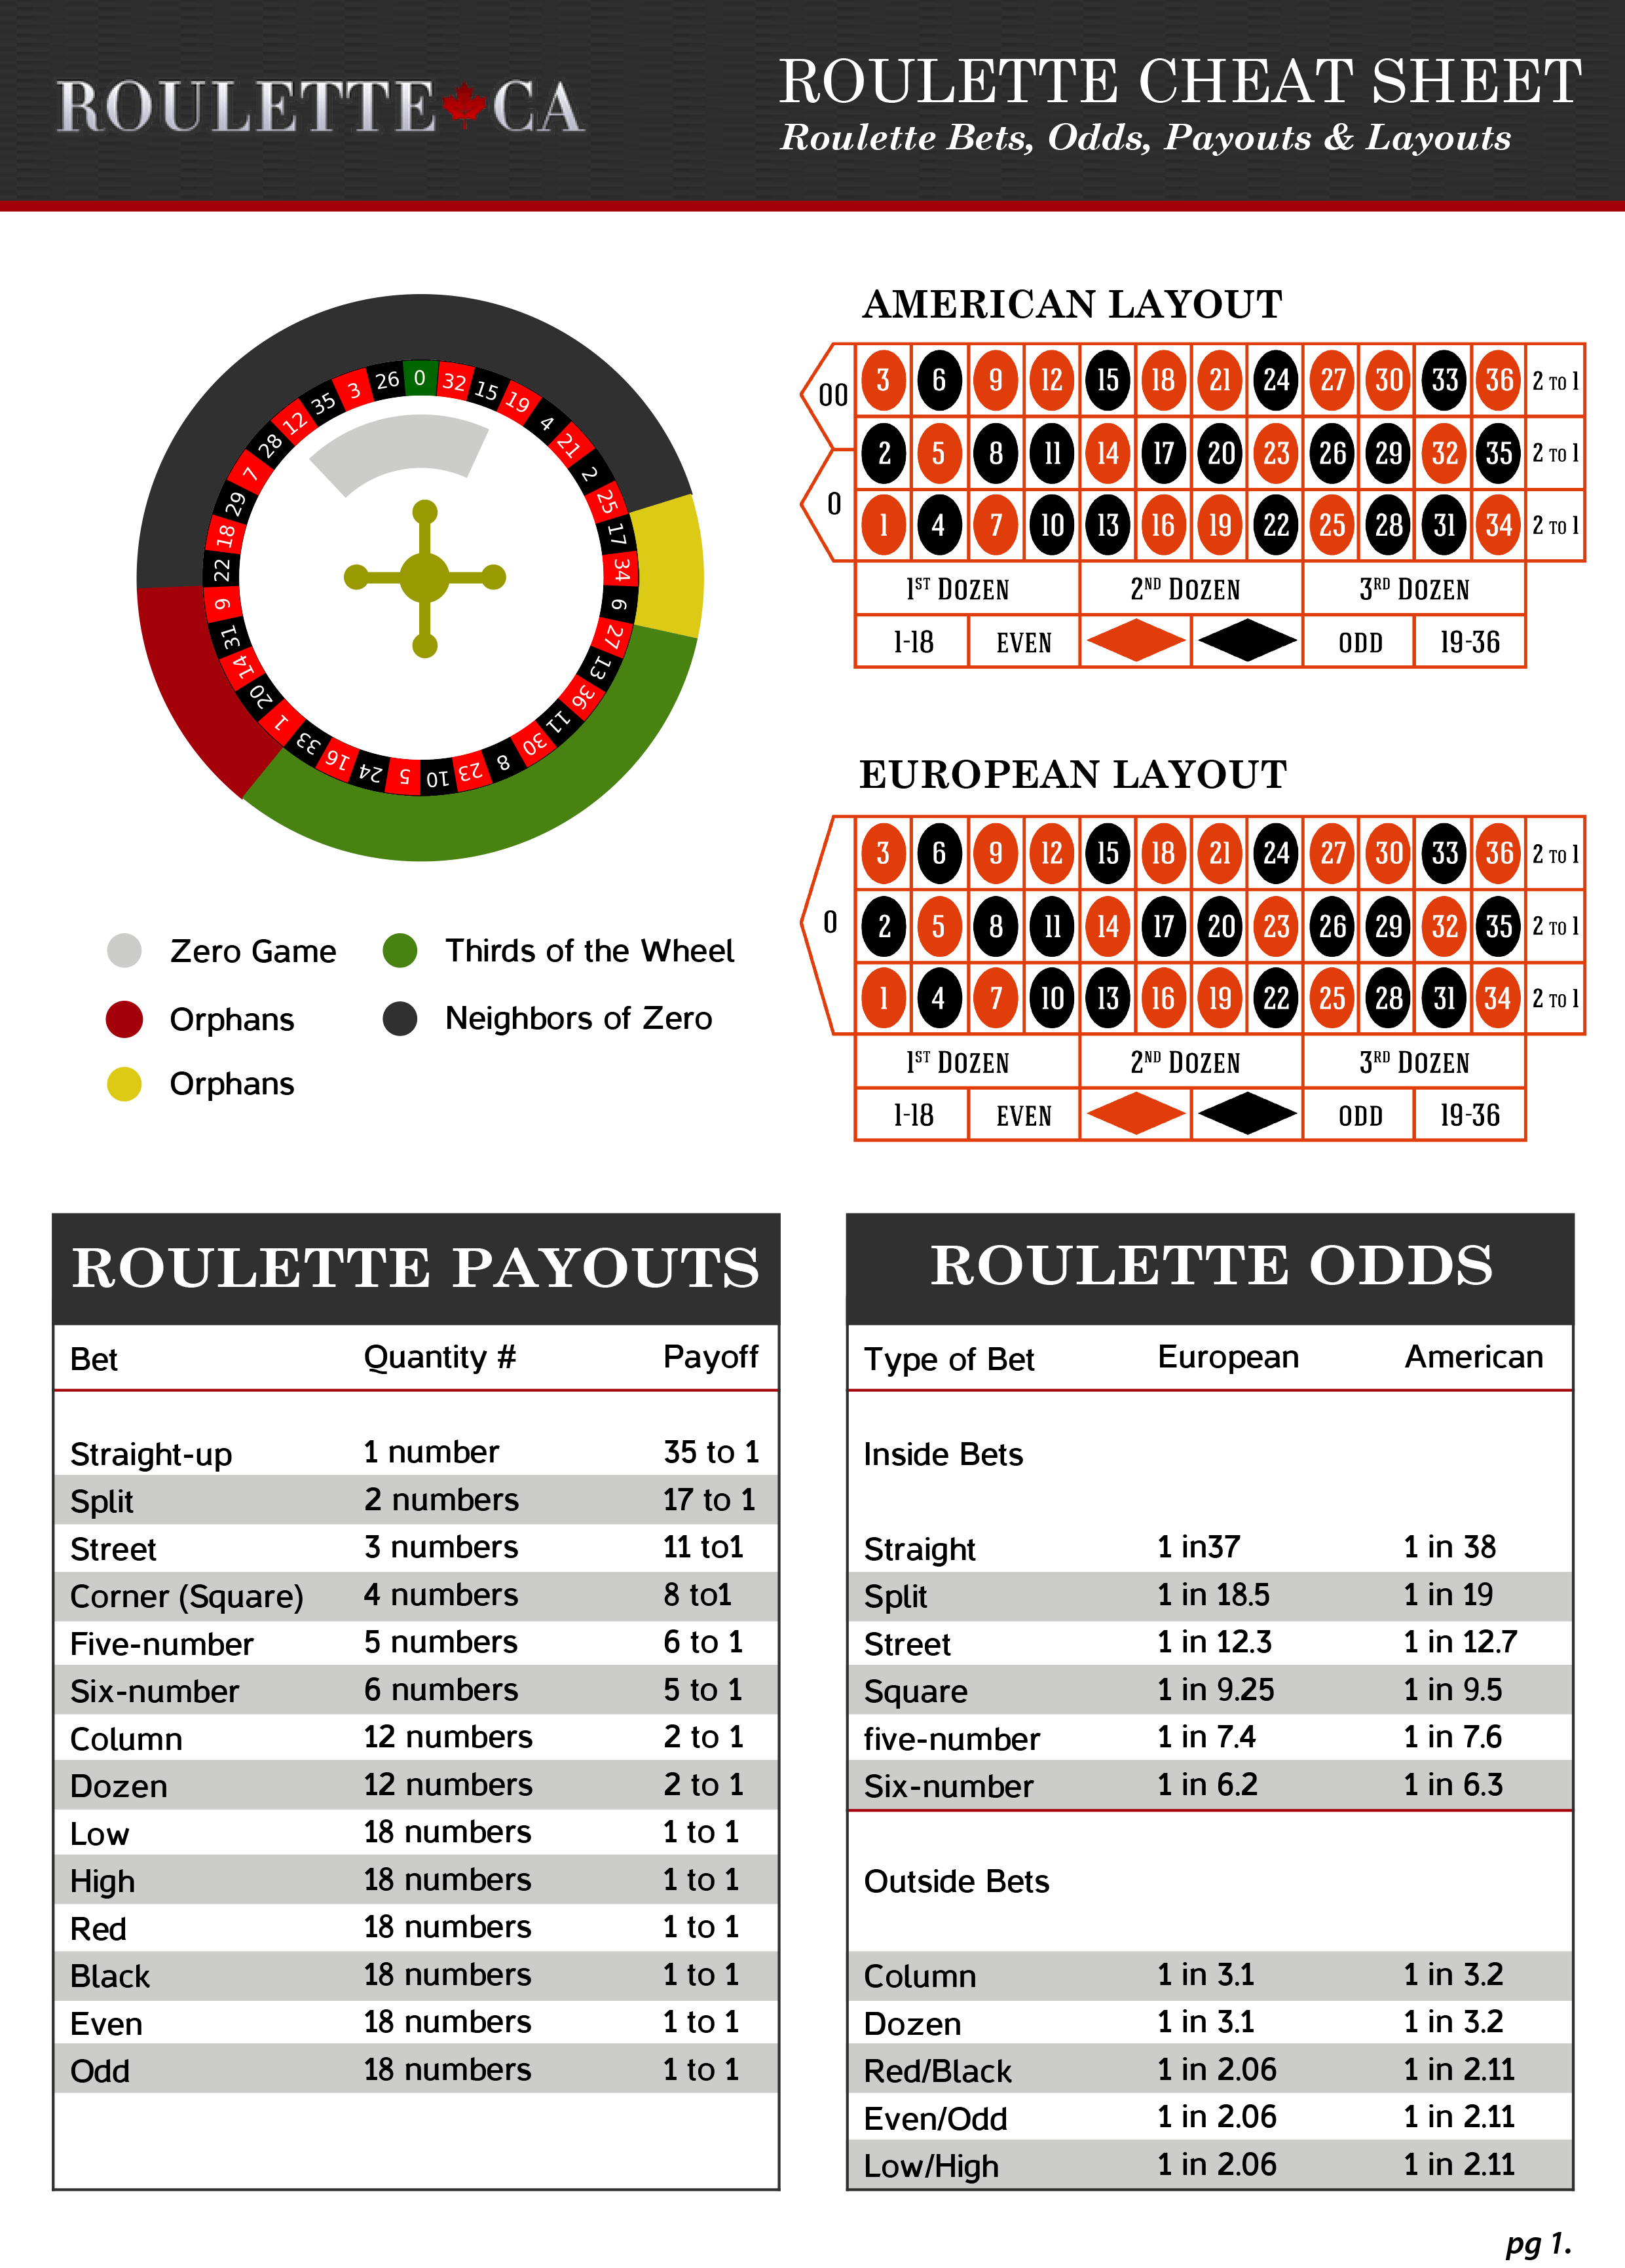 Roulette Bets & Odds Learn The Math Of Roulette Games